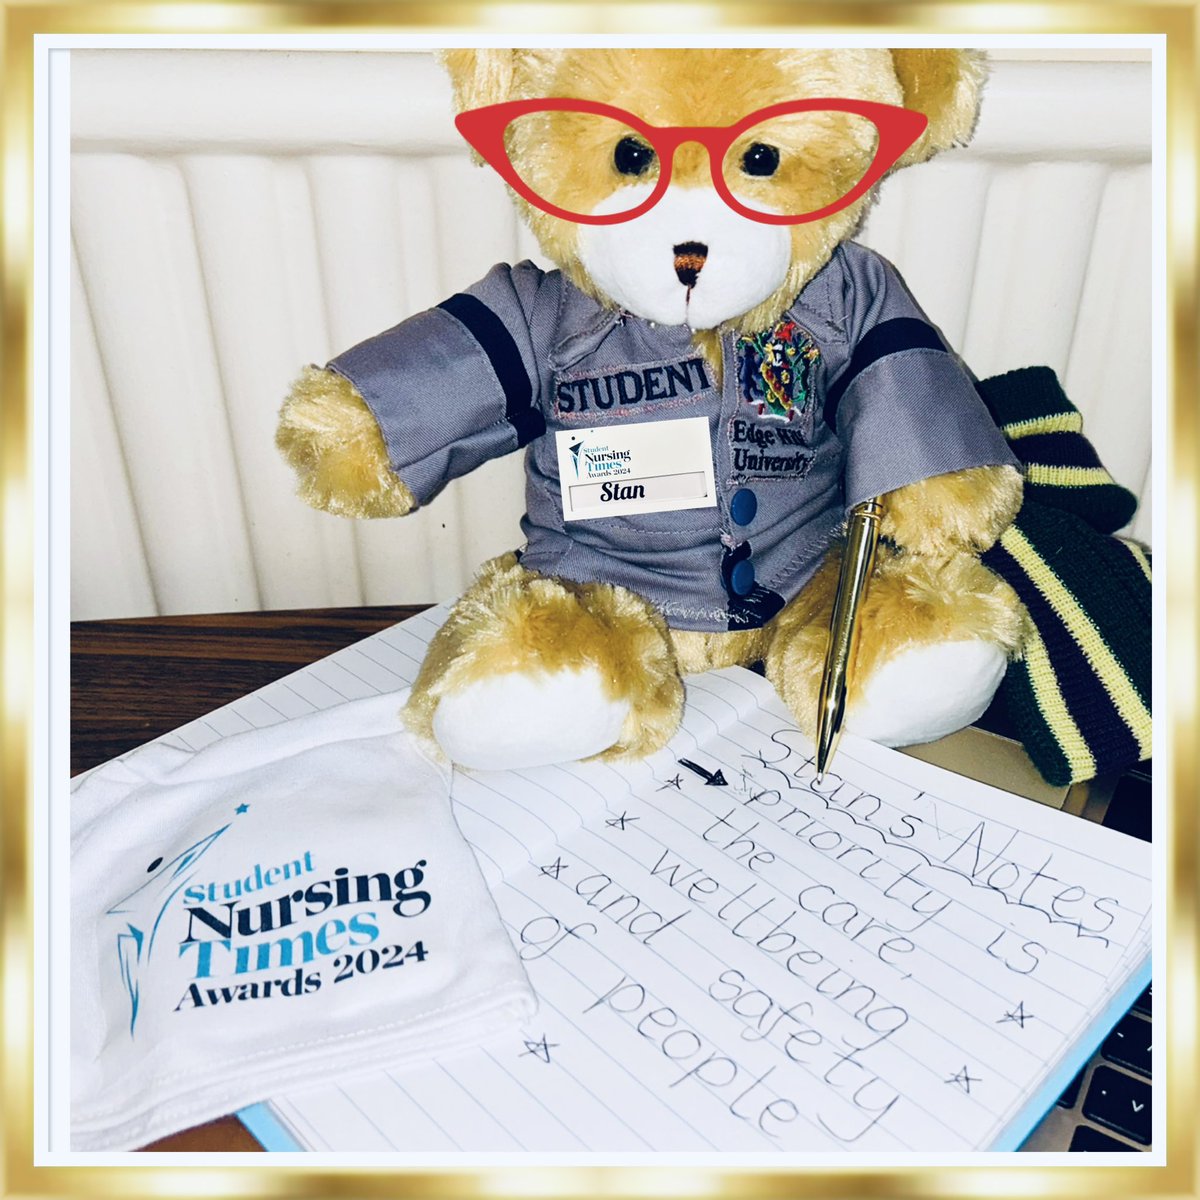 Stan student nurse has been working beary hard learning about the importance of prioritising the care and wellbeing of people @NursingTimes #SNTABear